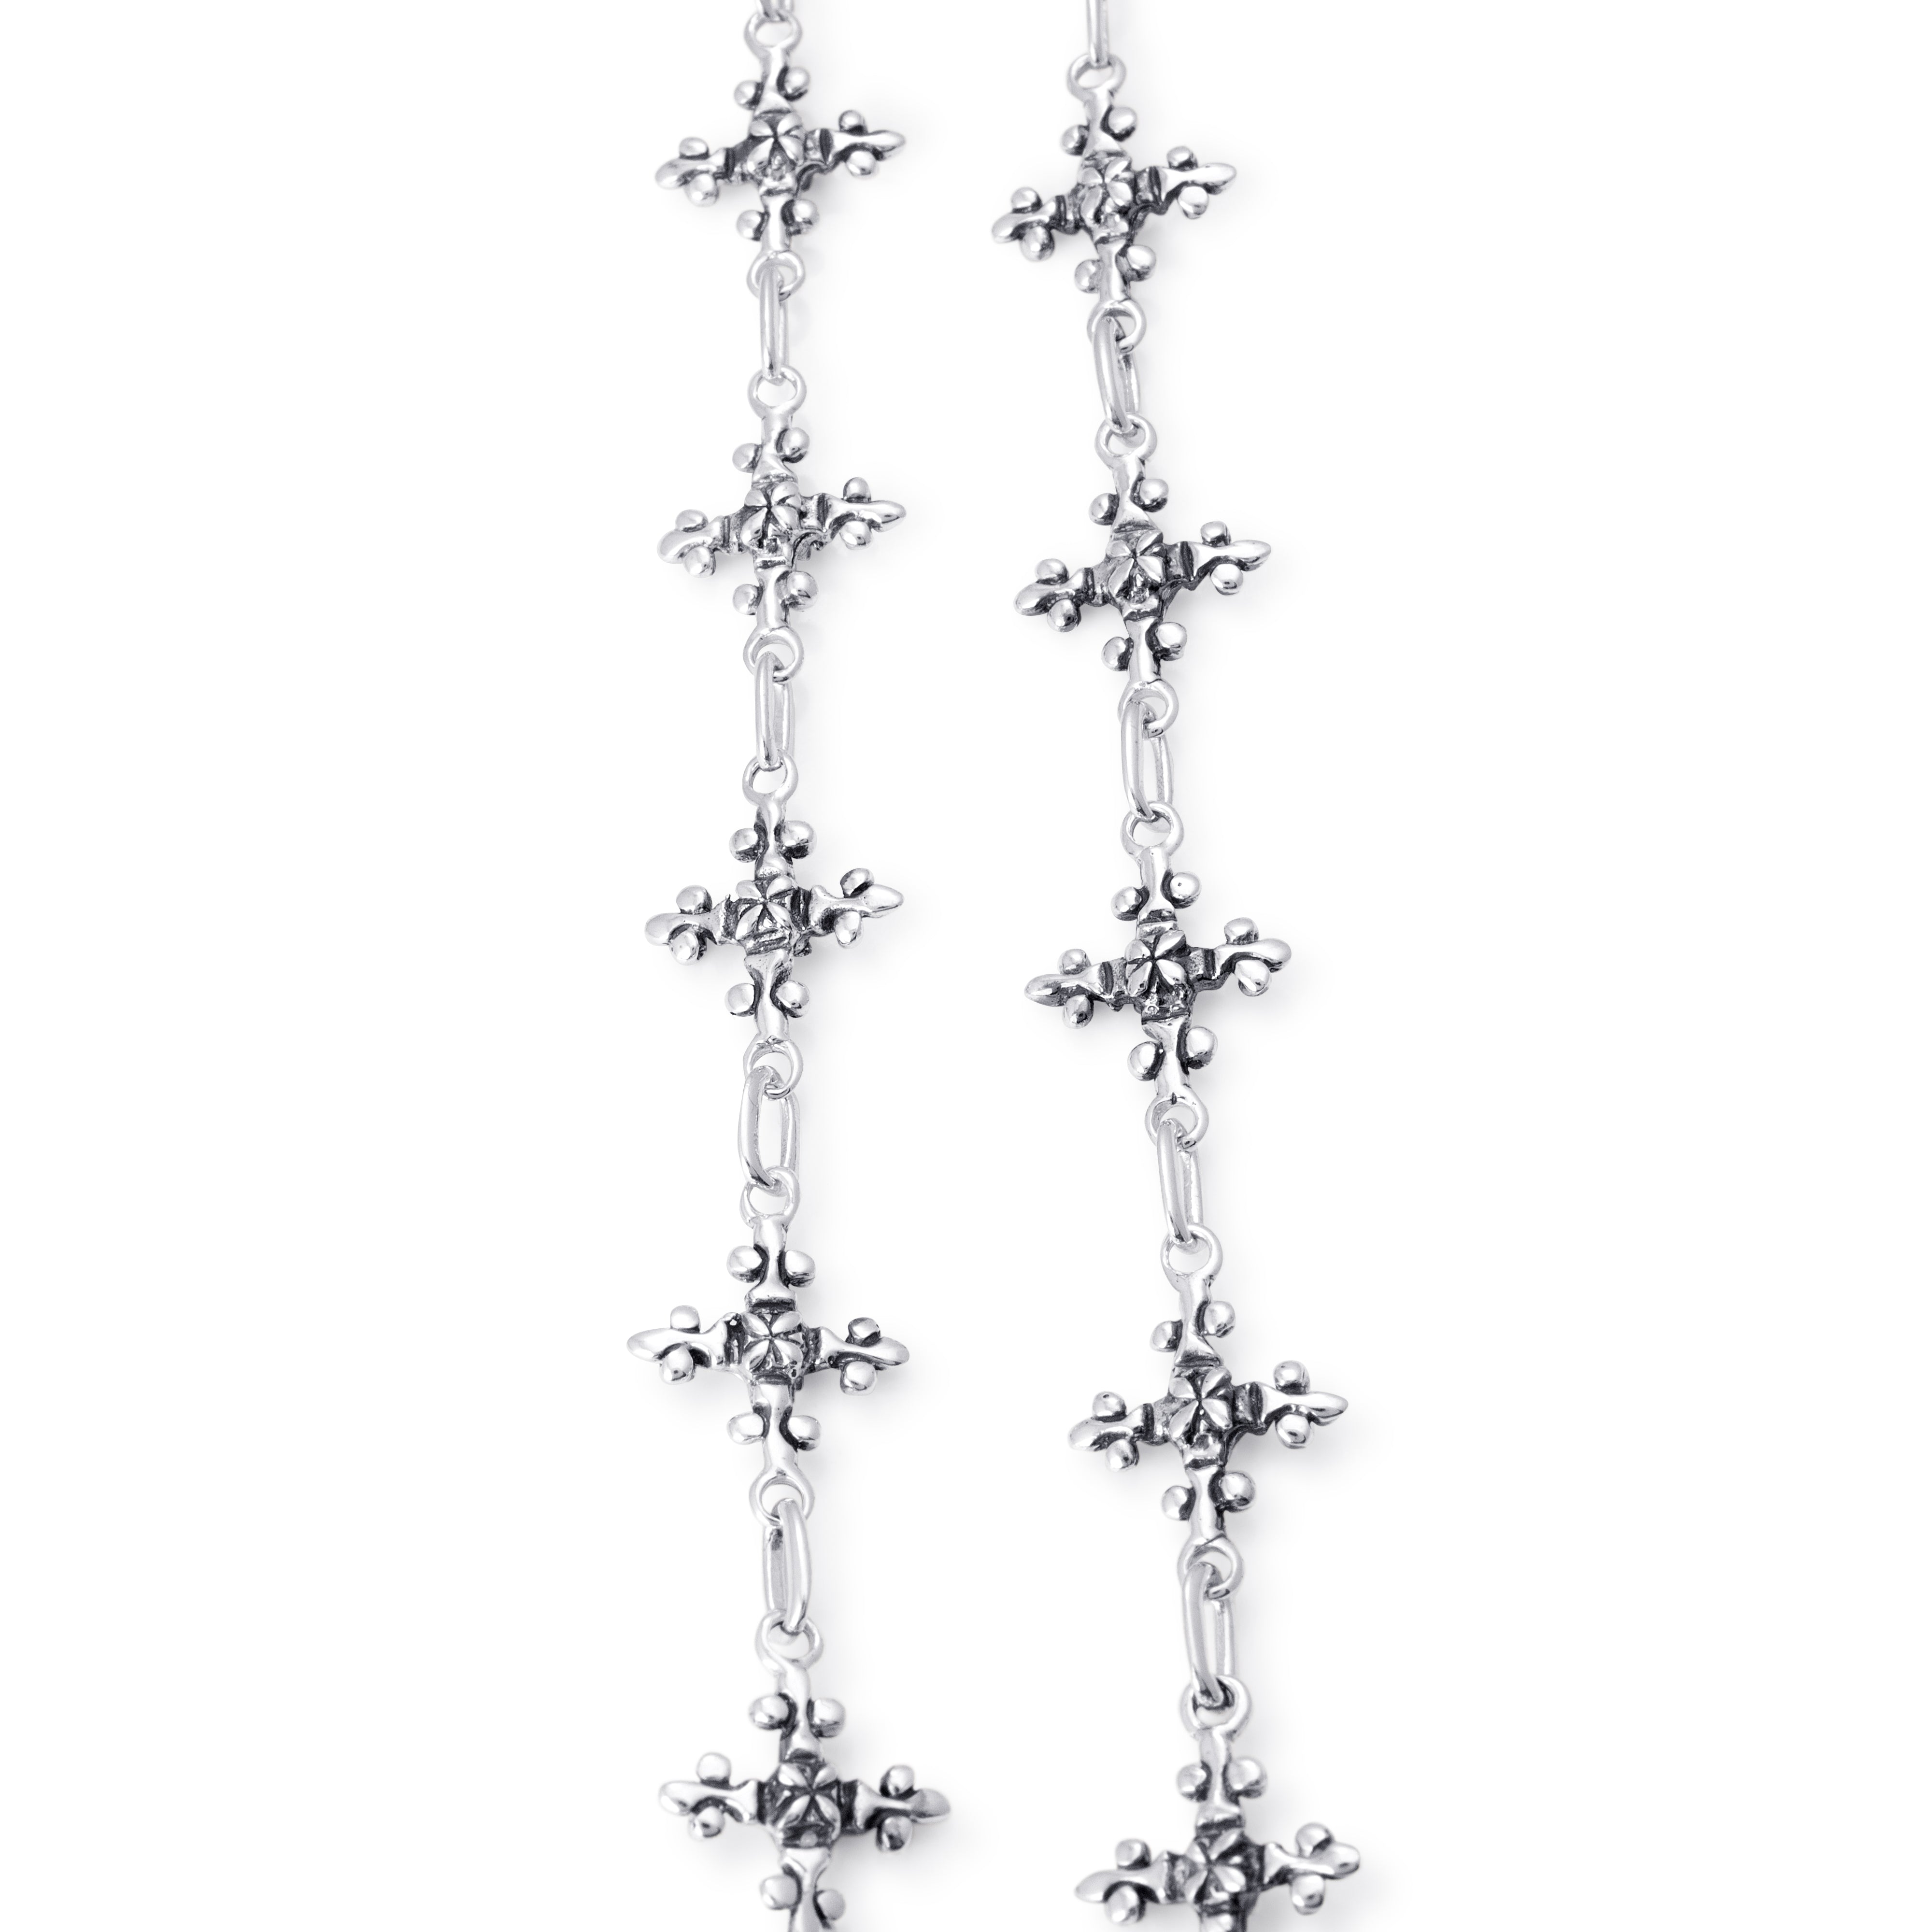 Bloodline Design W-Necklaces The Antique French Cross Necklace toggle